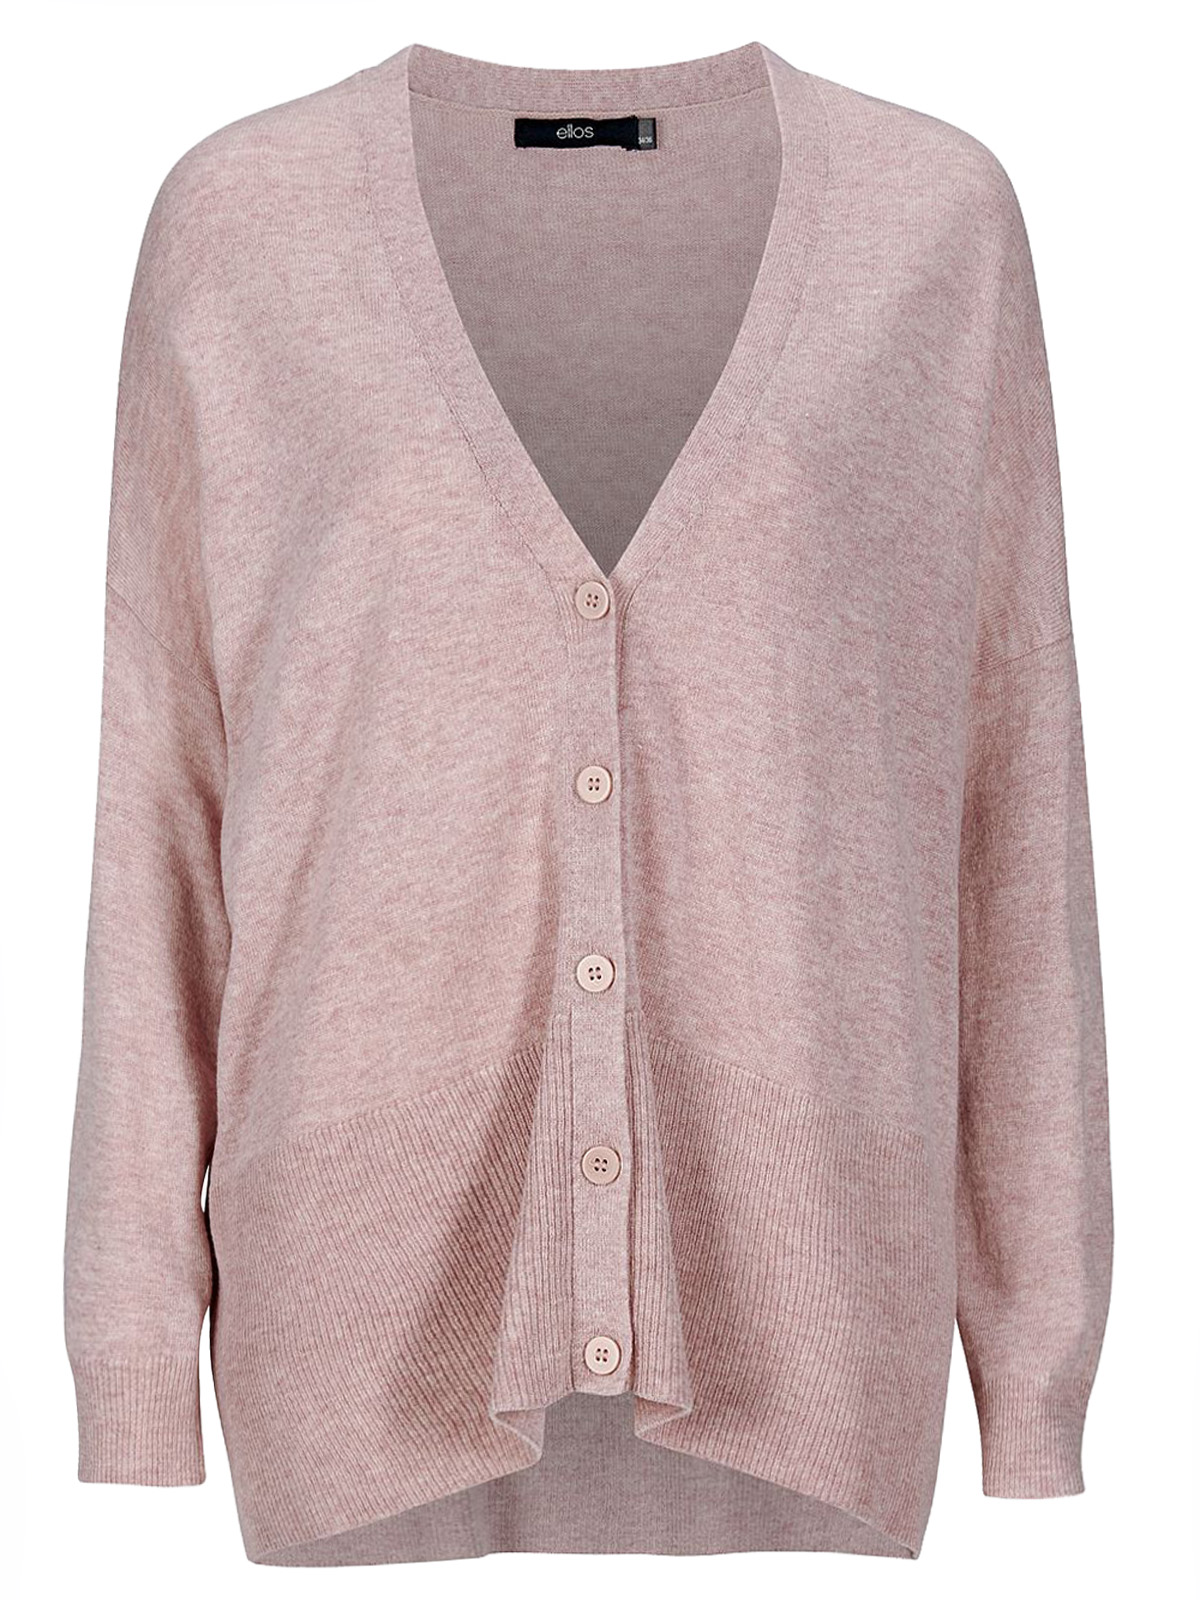 Ellos - - Ellos ROSE Elvira Relaxed Knit Cardigan with Wool - Size 8/10 ...